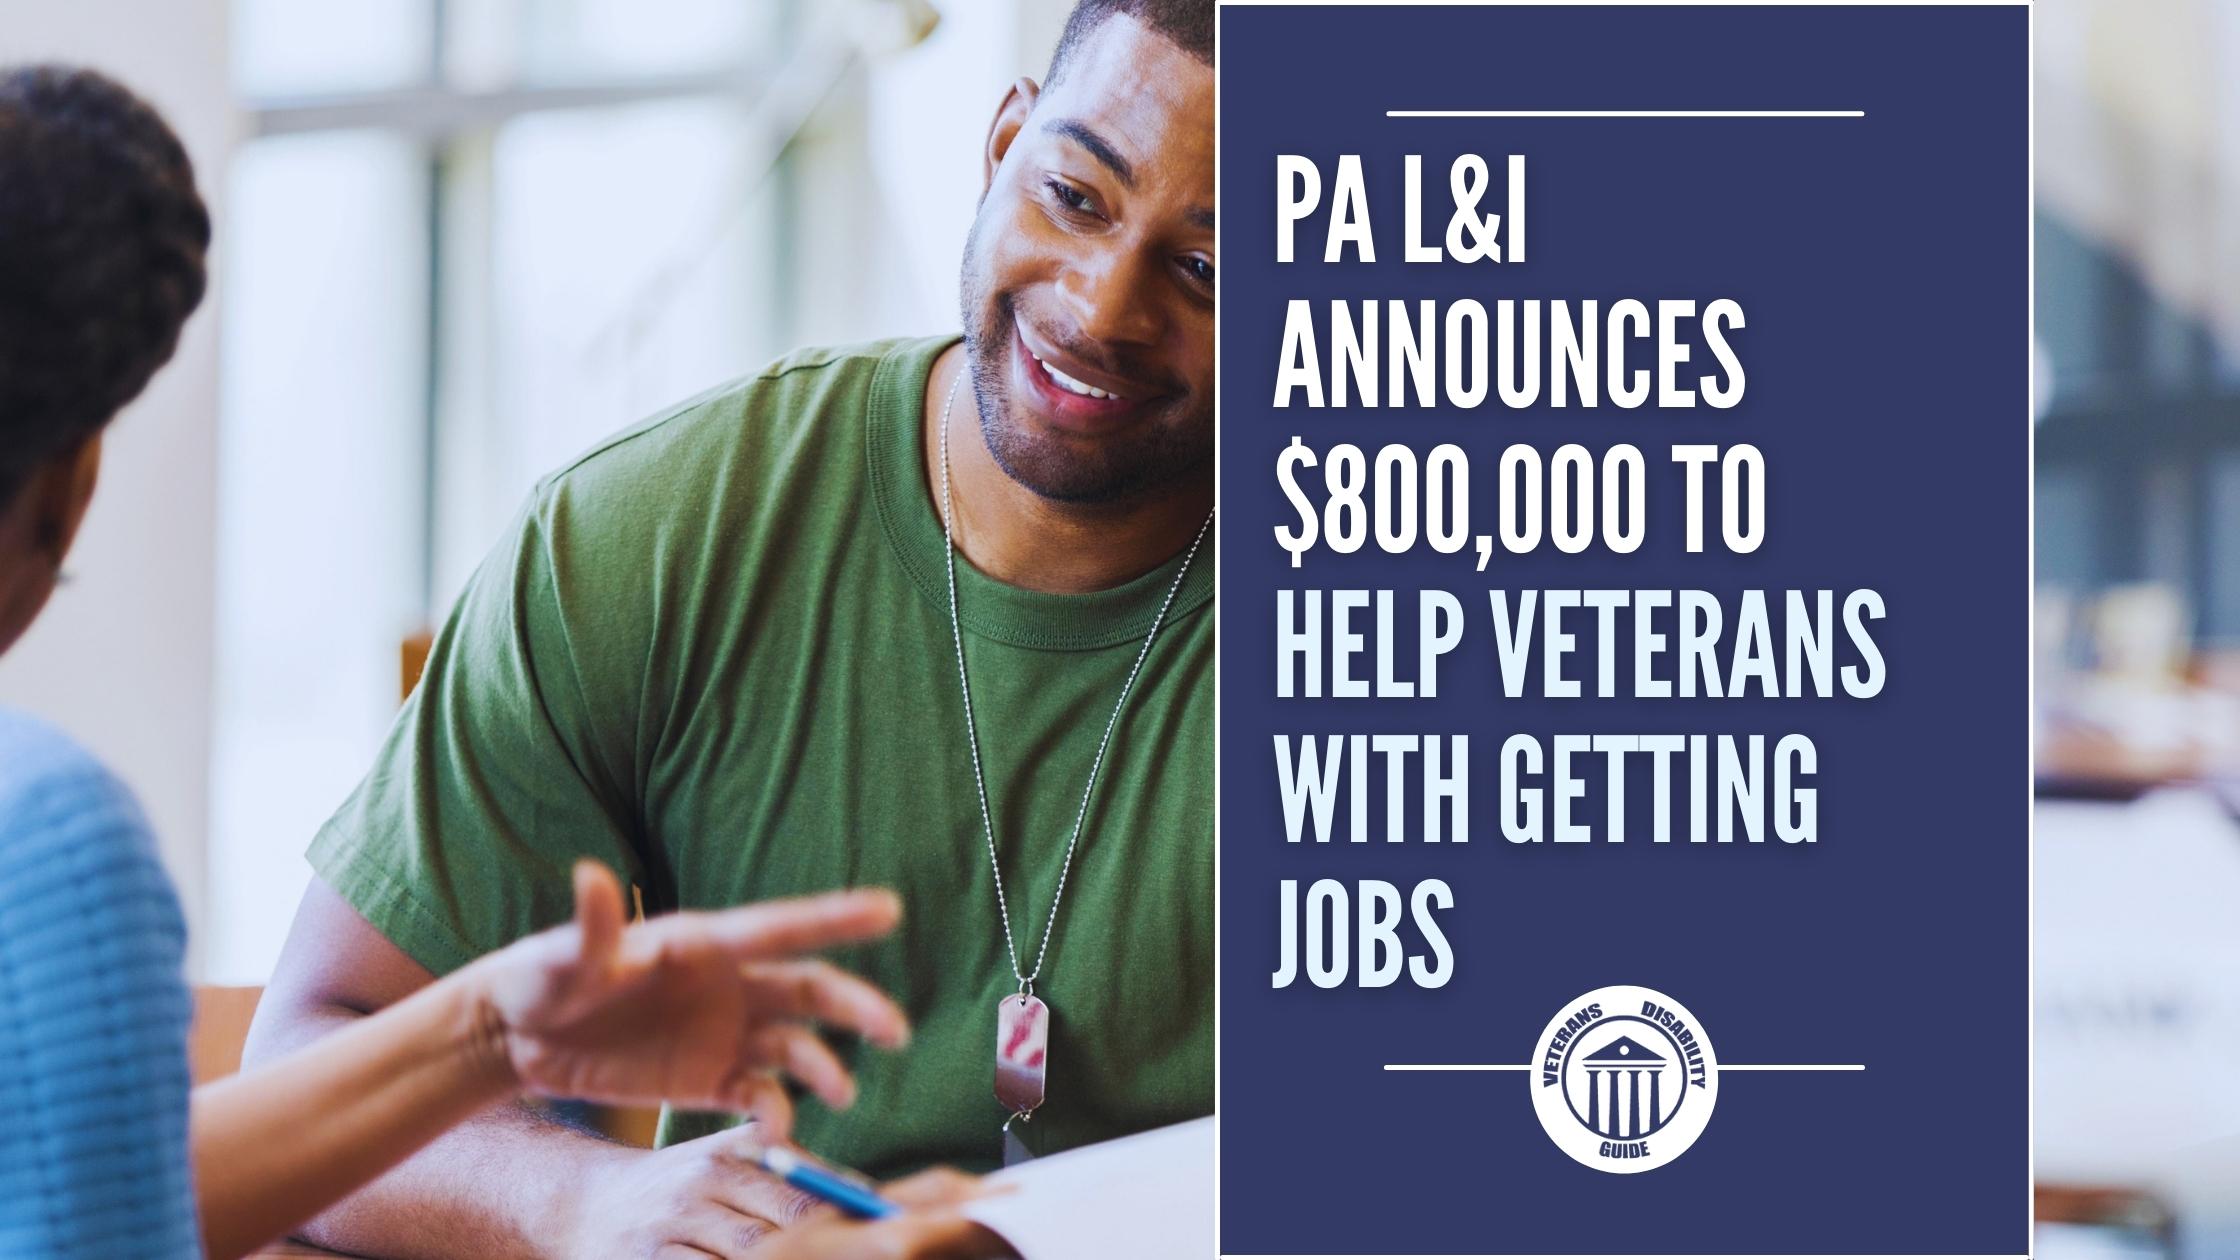 The PA L&I Announces $800,000 to Help Veterans With Getting Jobs blog header image